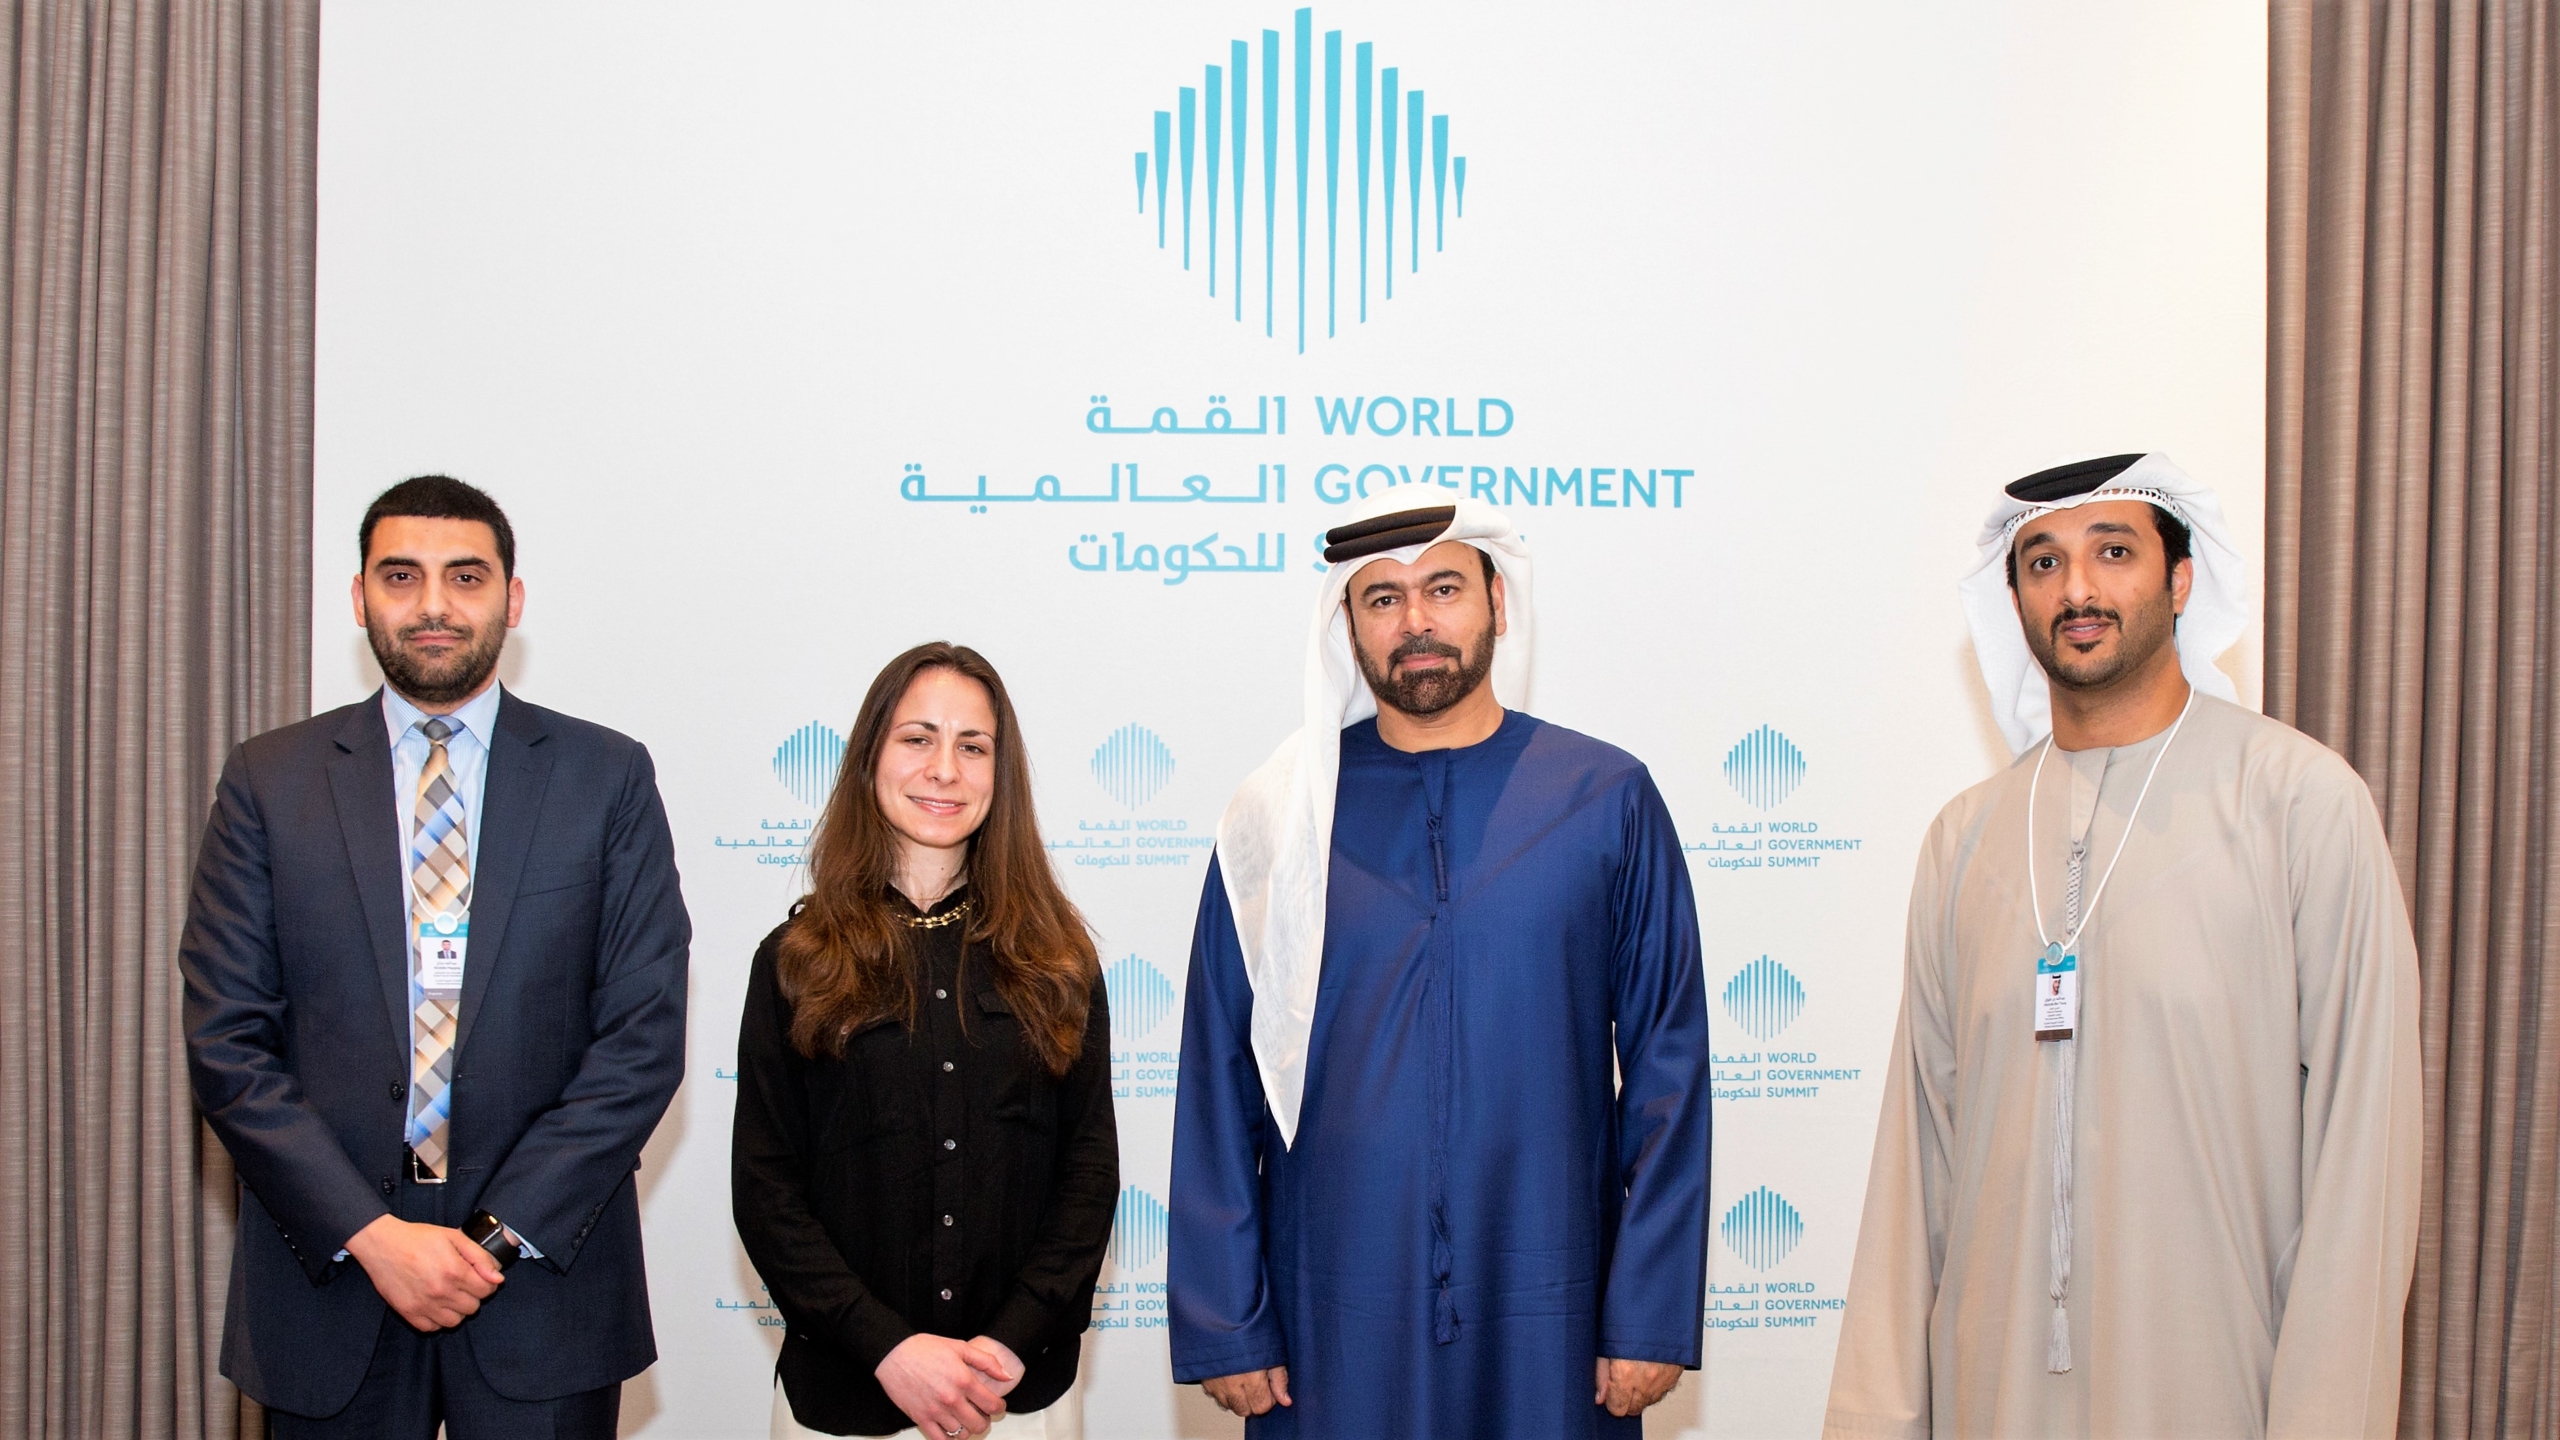 DFF launched the Future Design Center